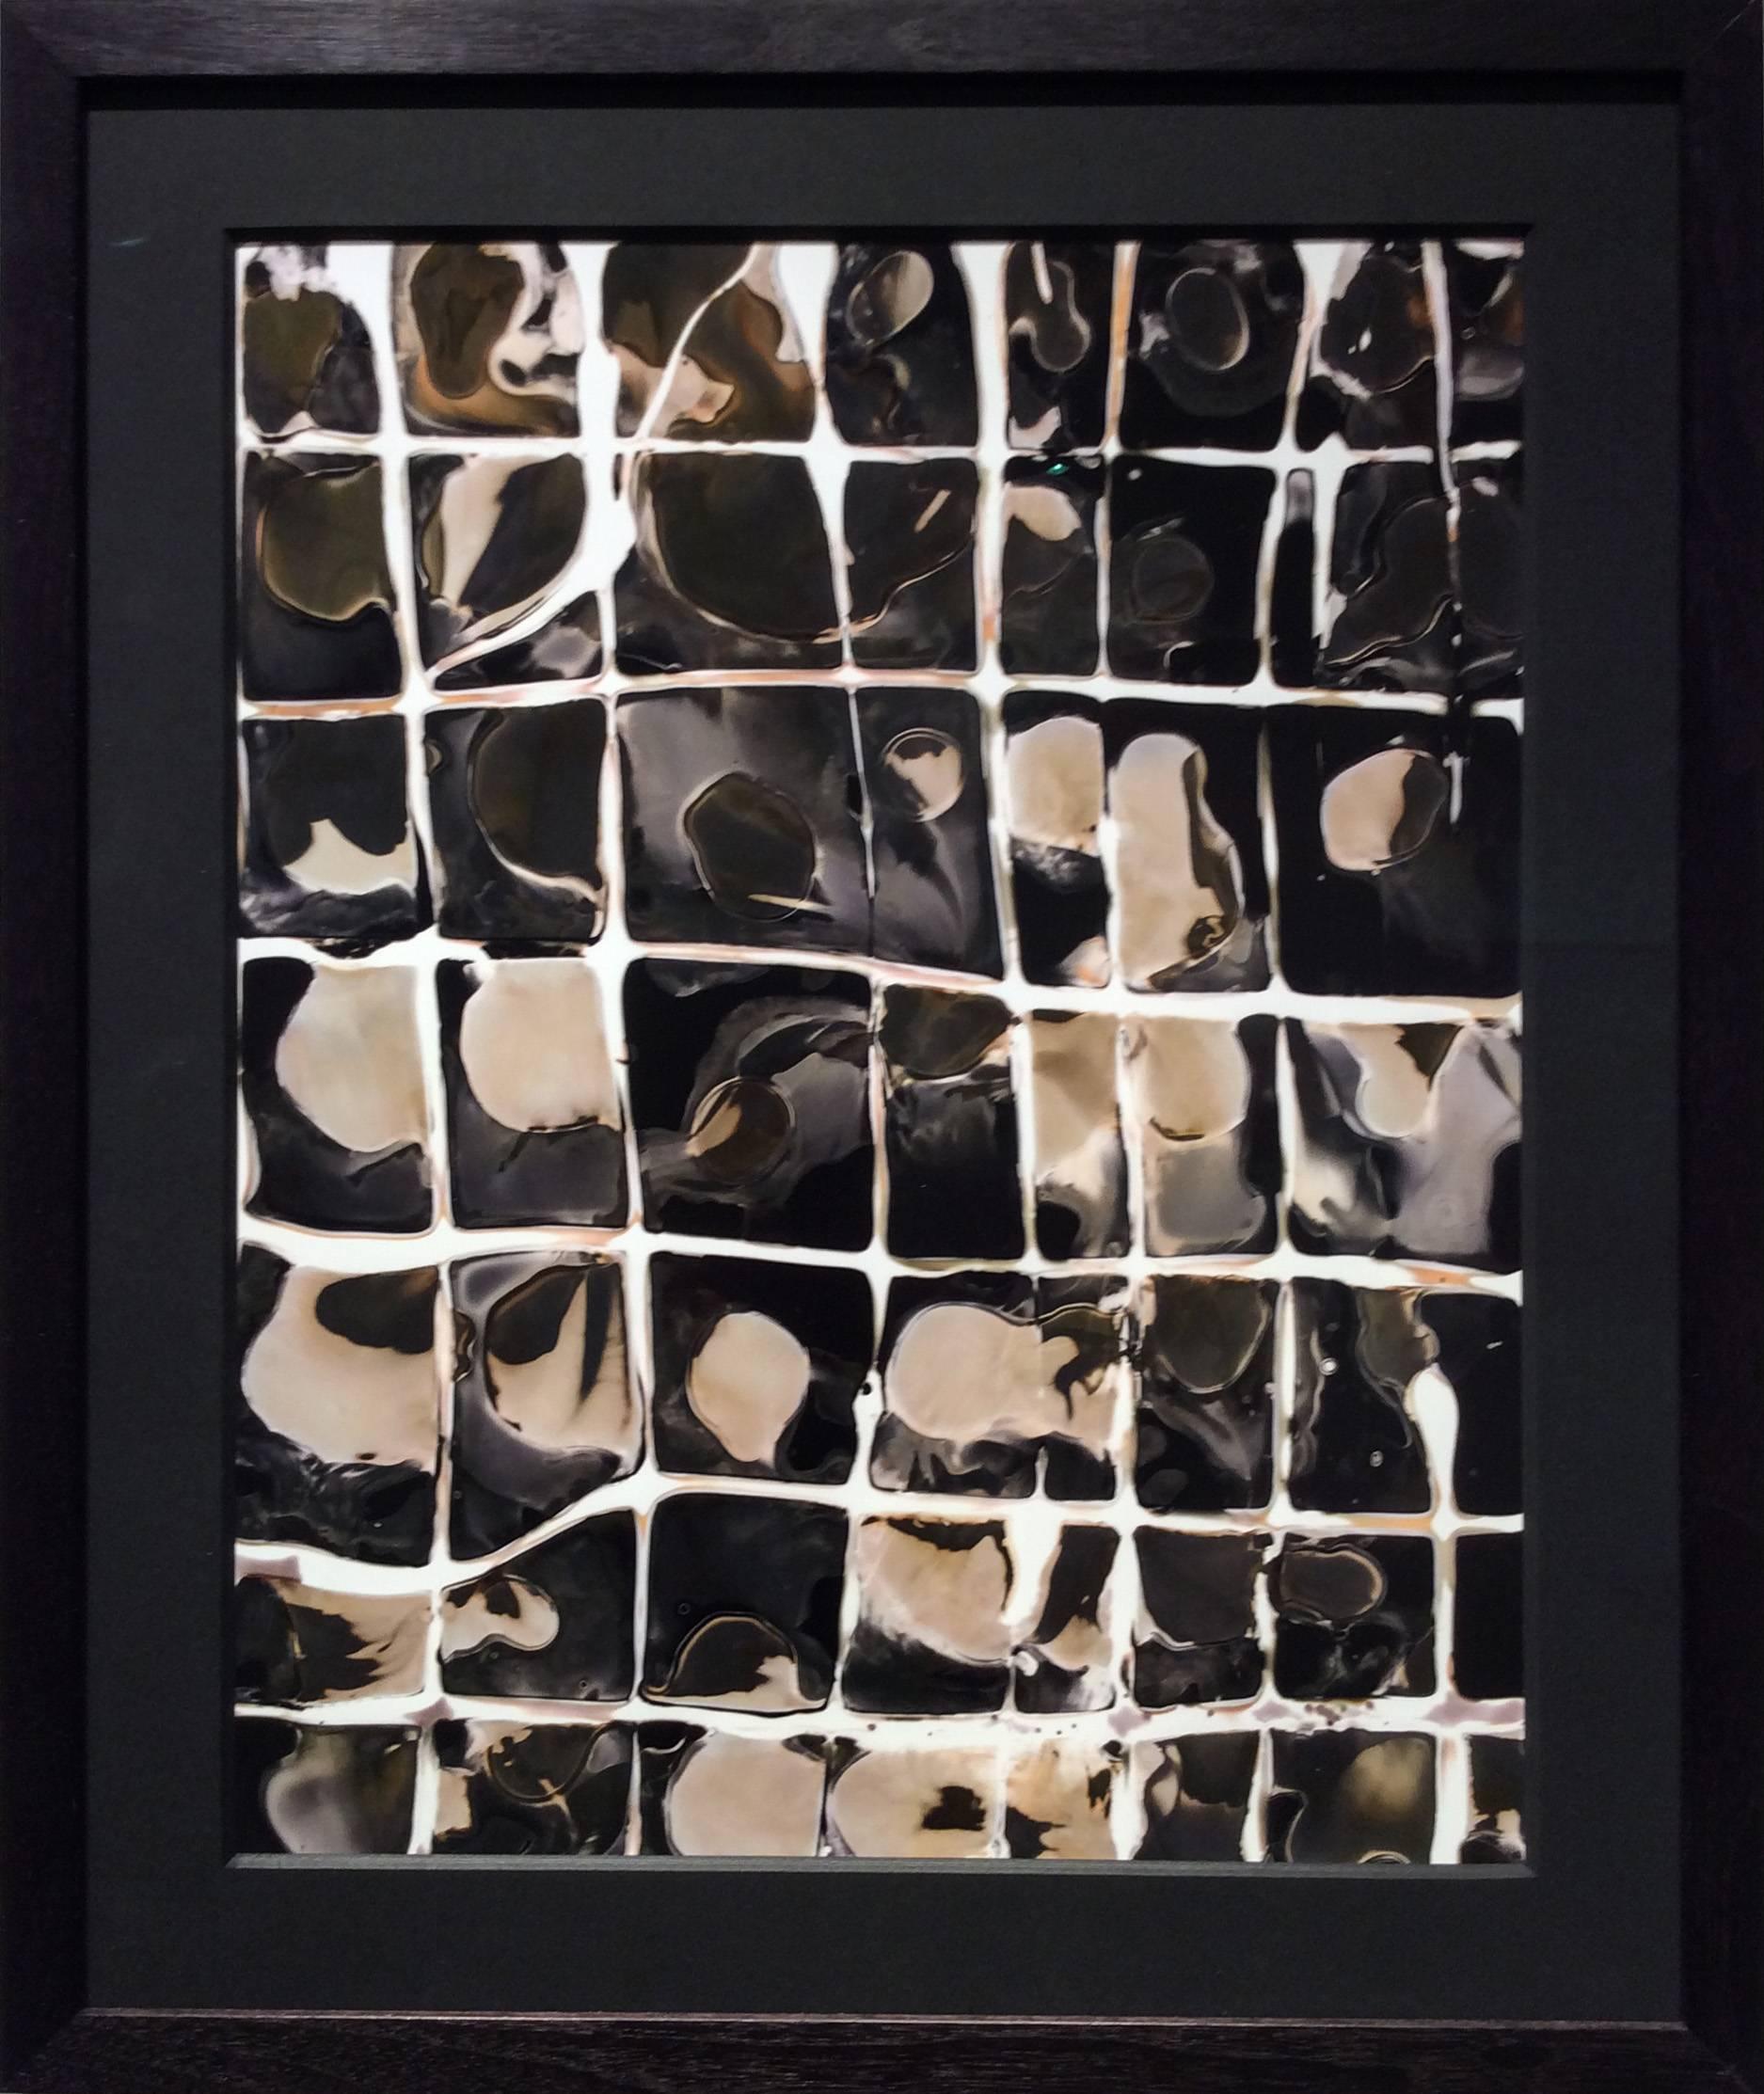 Birgit Blyth Abstract Photograph - No. 3, Cubes (Abstract Digital Photograph in Earth Toned Palette, Framed)